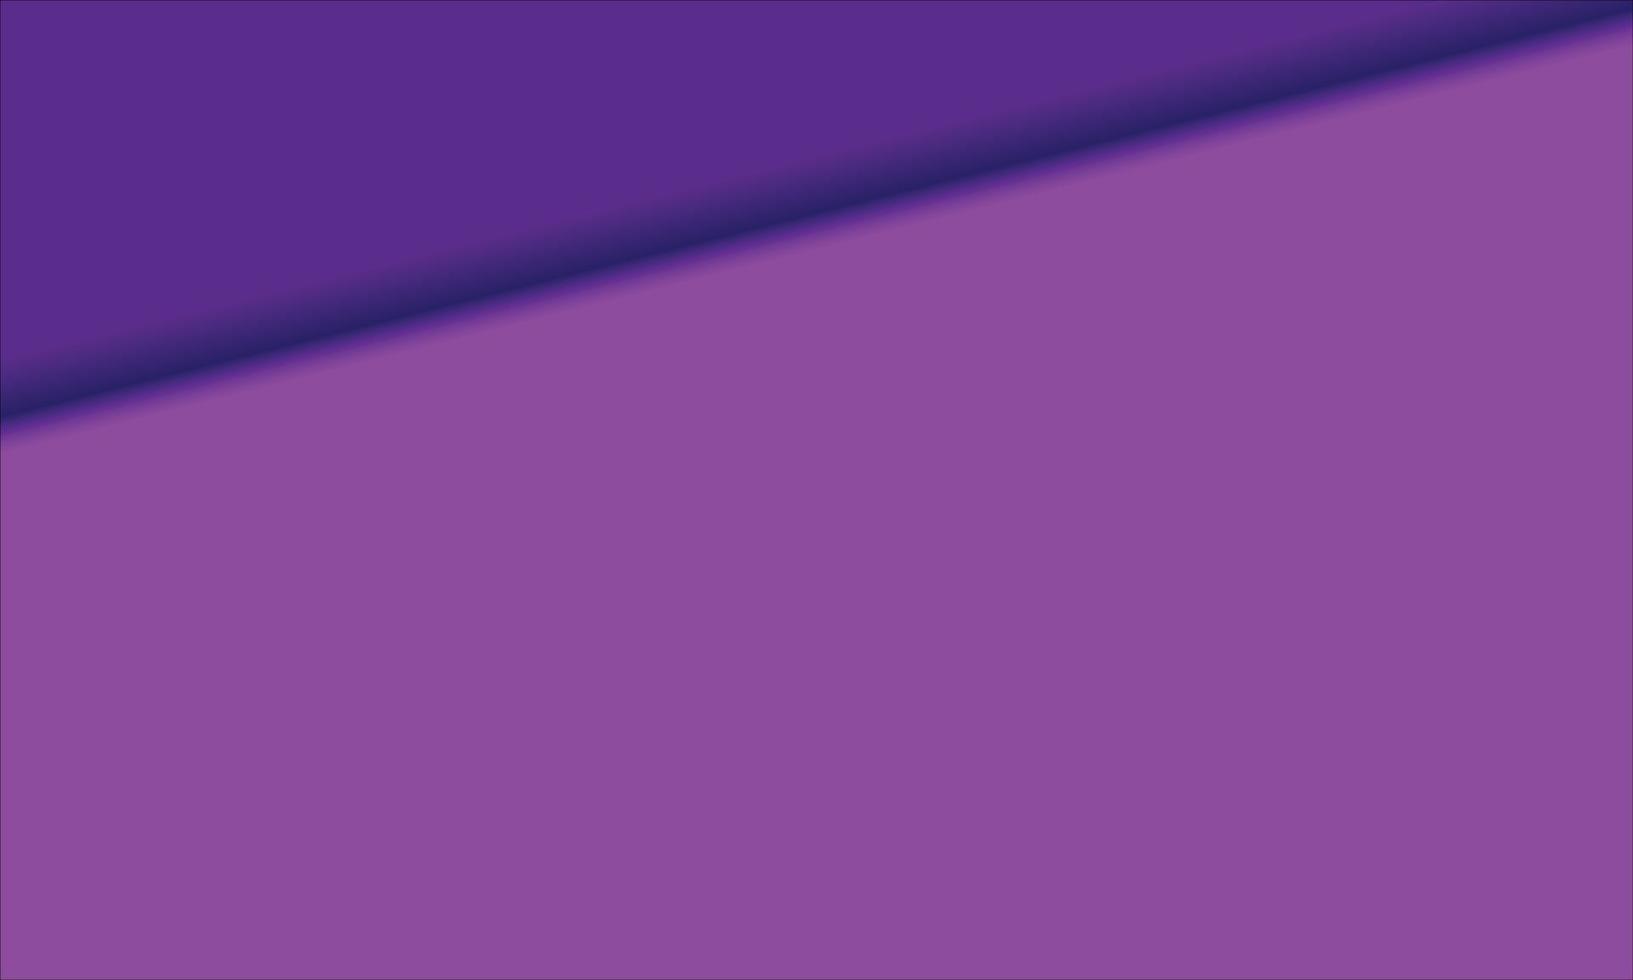 Background with a mix of dark purple and light purple vector